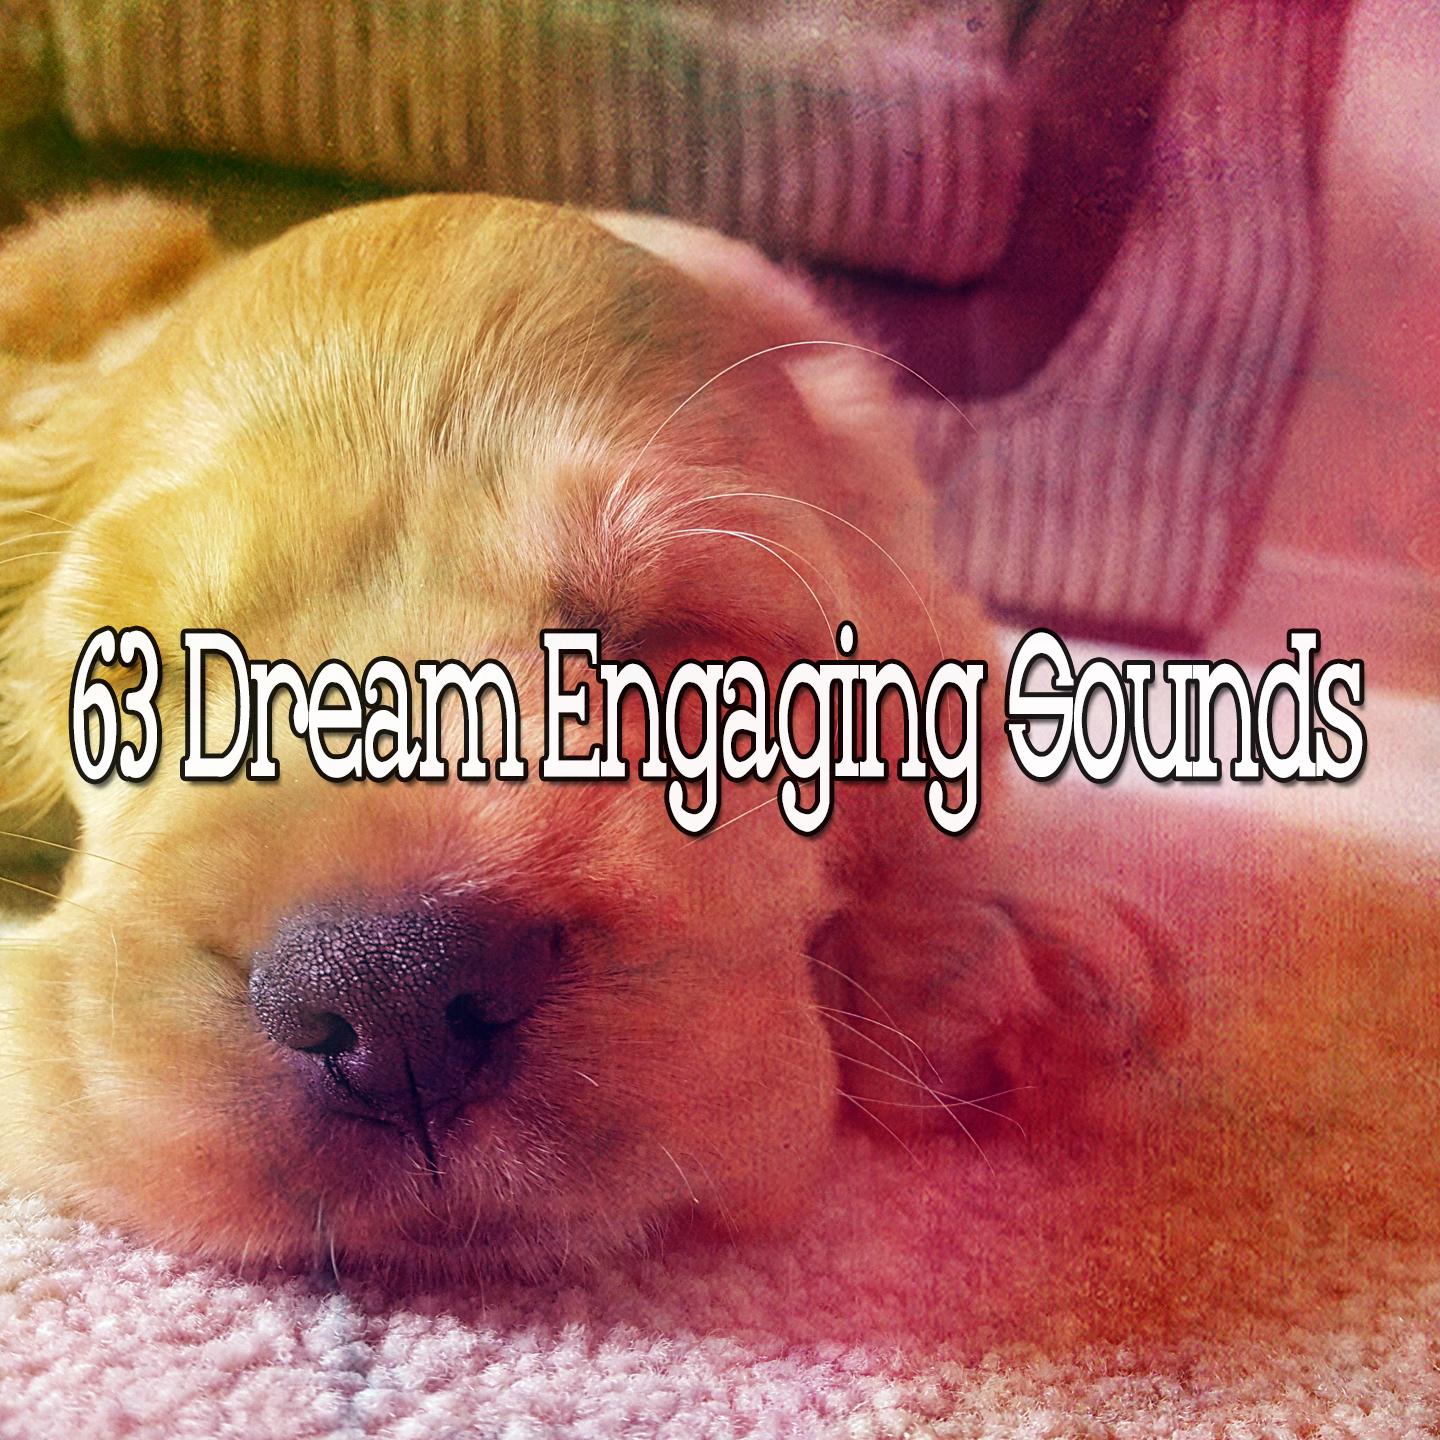 63 Dream Engaging Sounds